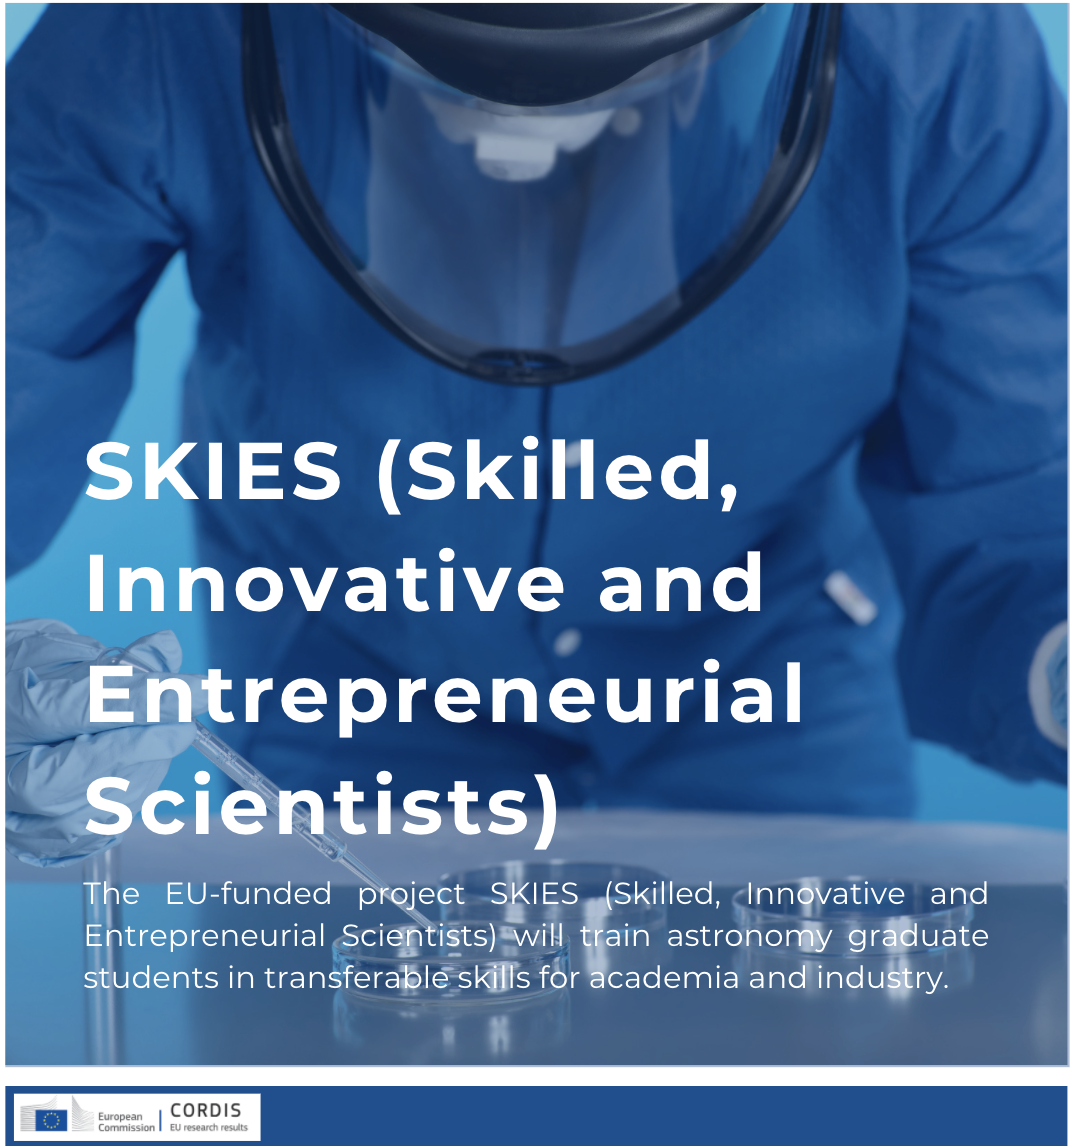 (Skilled, Innovative and Entrepreneurial Scientists)